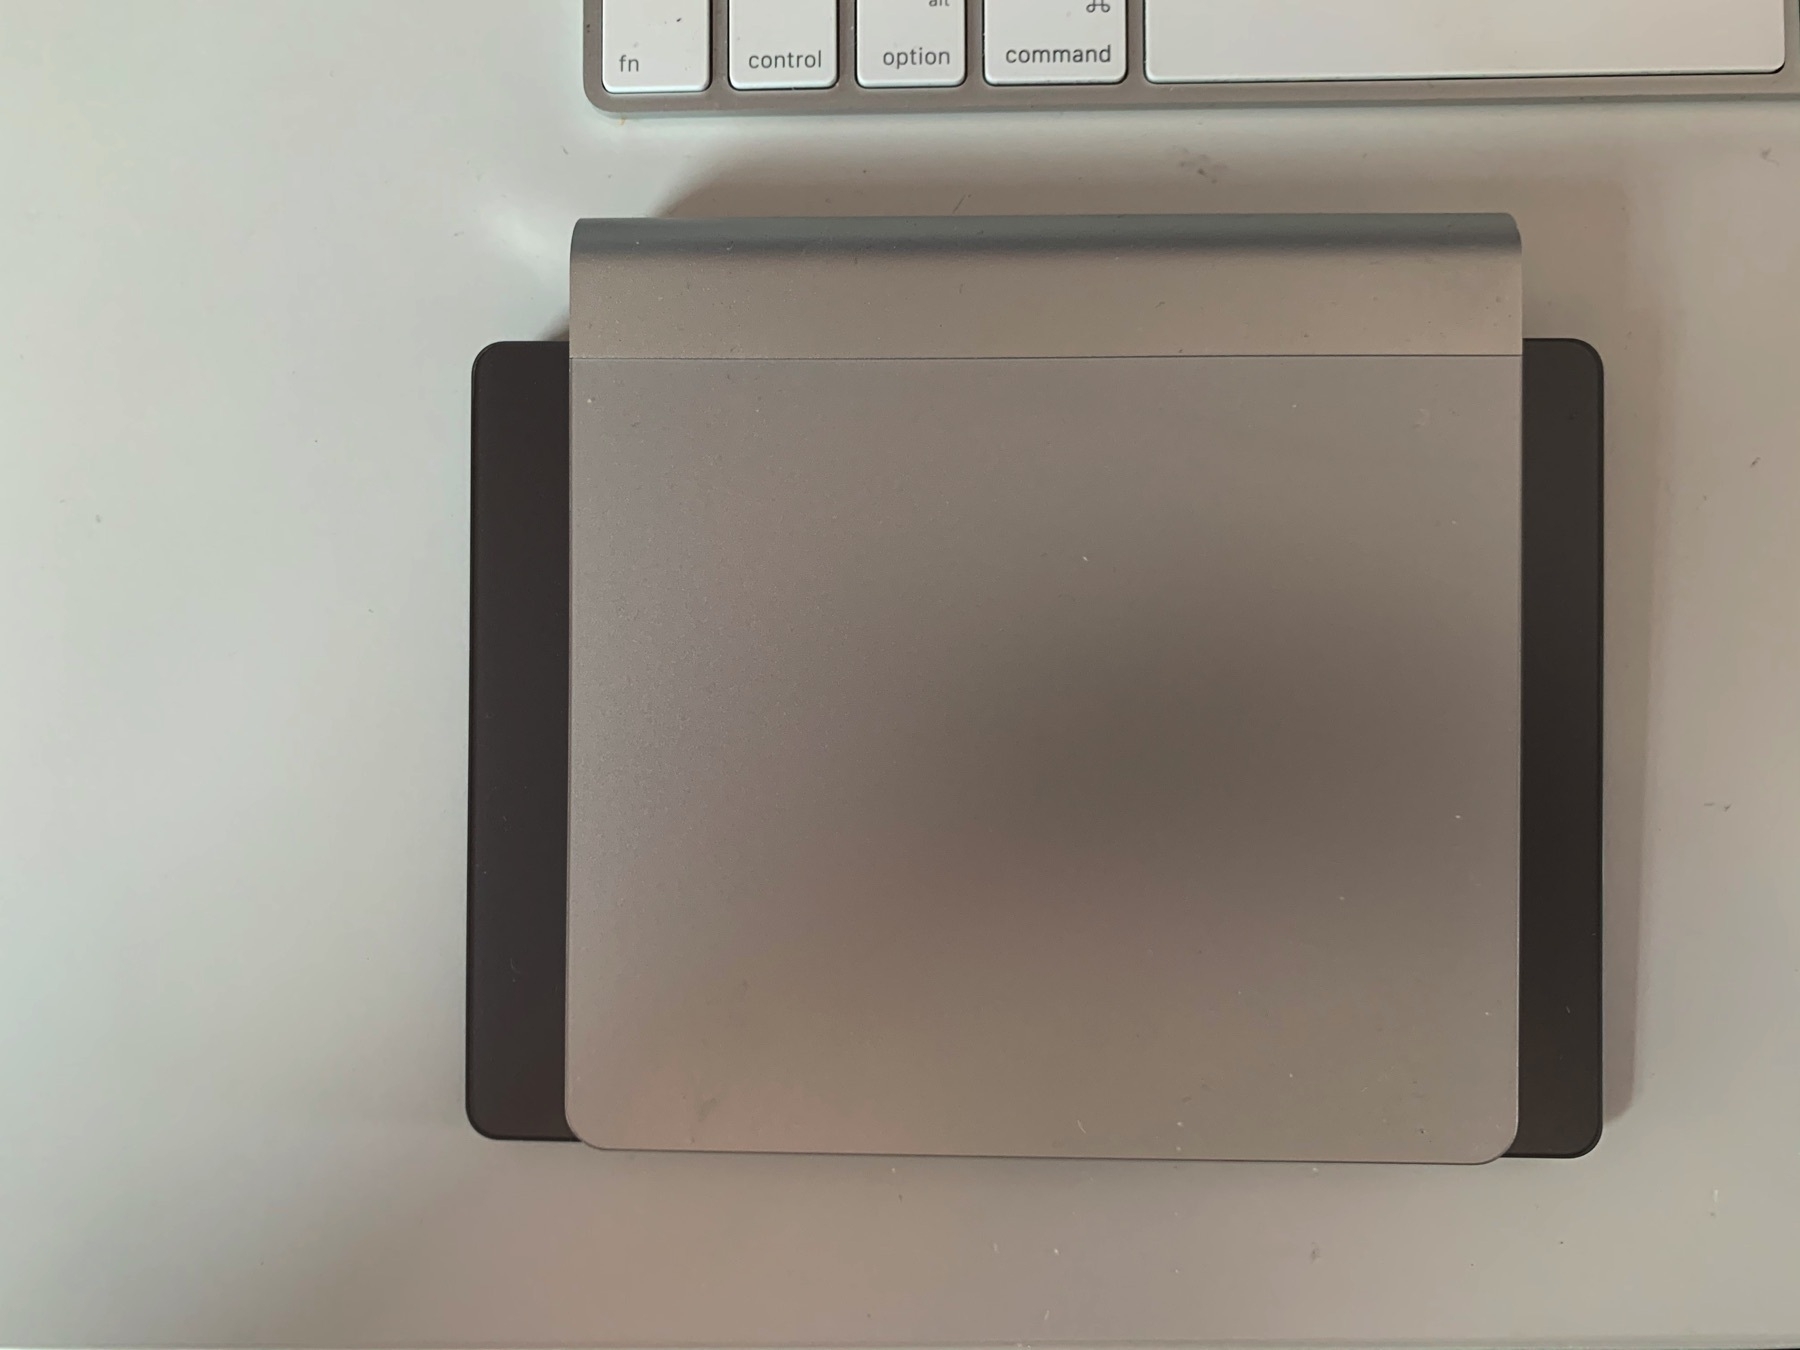 A silver original generation Magic Trackpad sitting on top of a space grey magic trackpad 2. The Magic Trackpad 2 has a much bigger surface area, and so can be seen poking out the sides below the original trackpad.